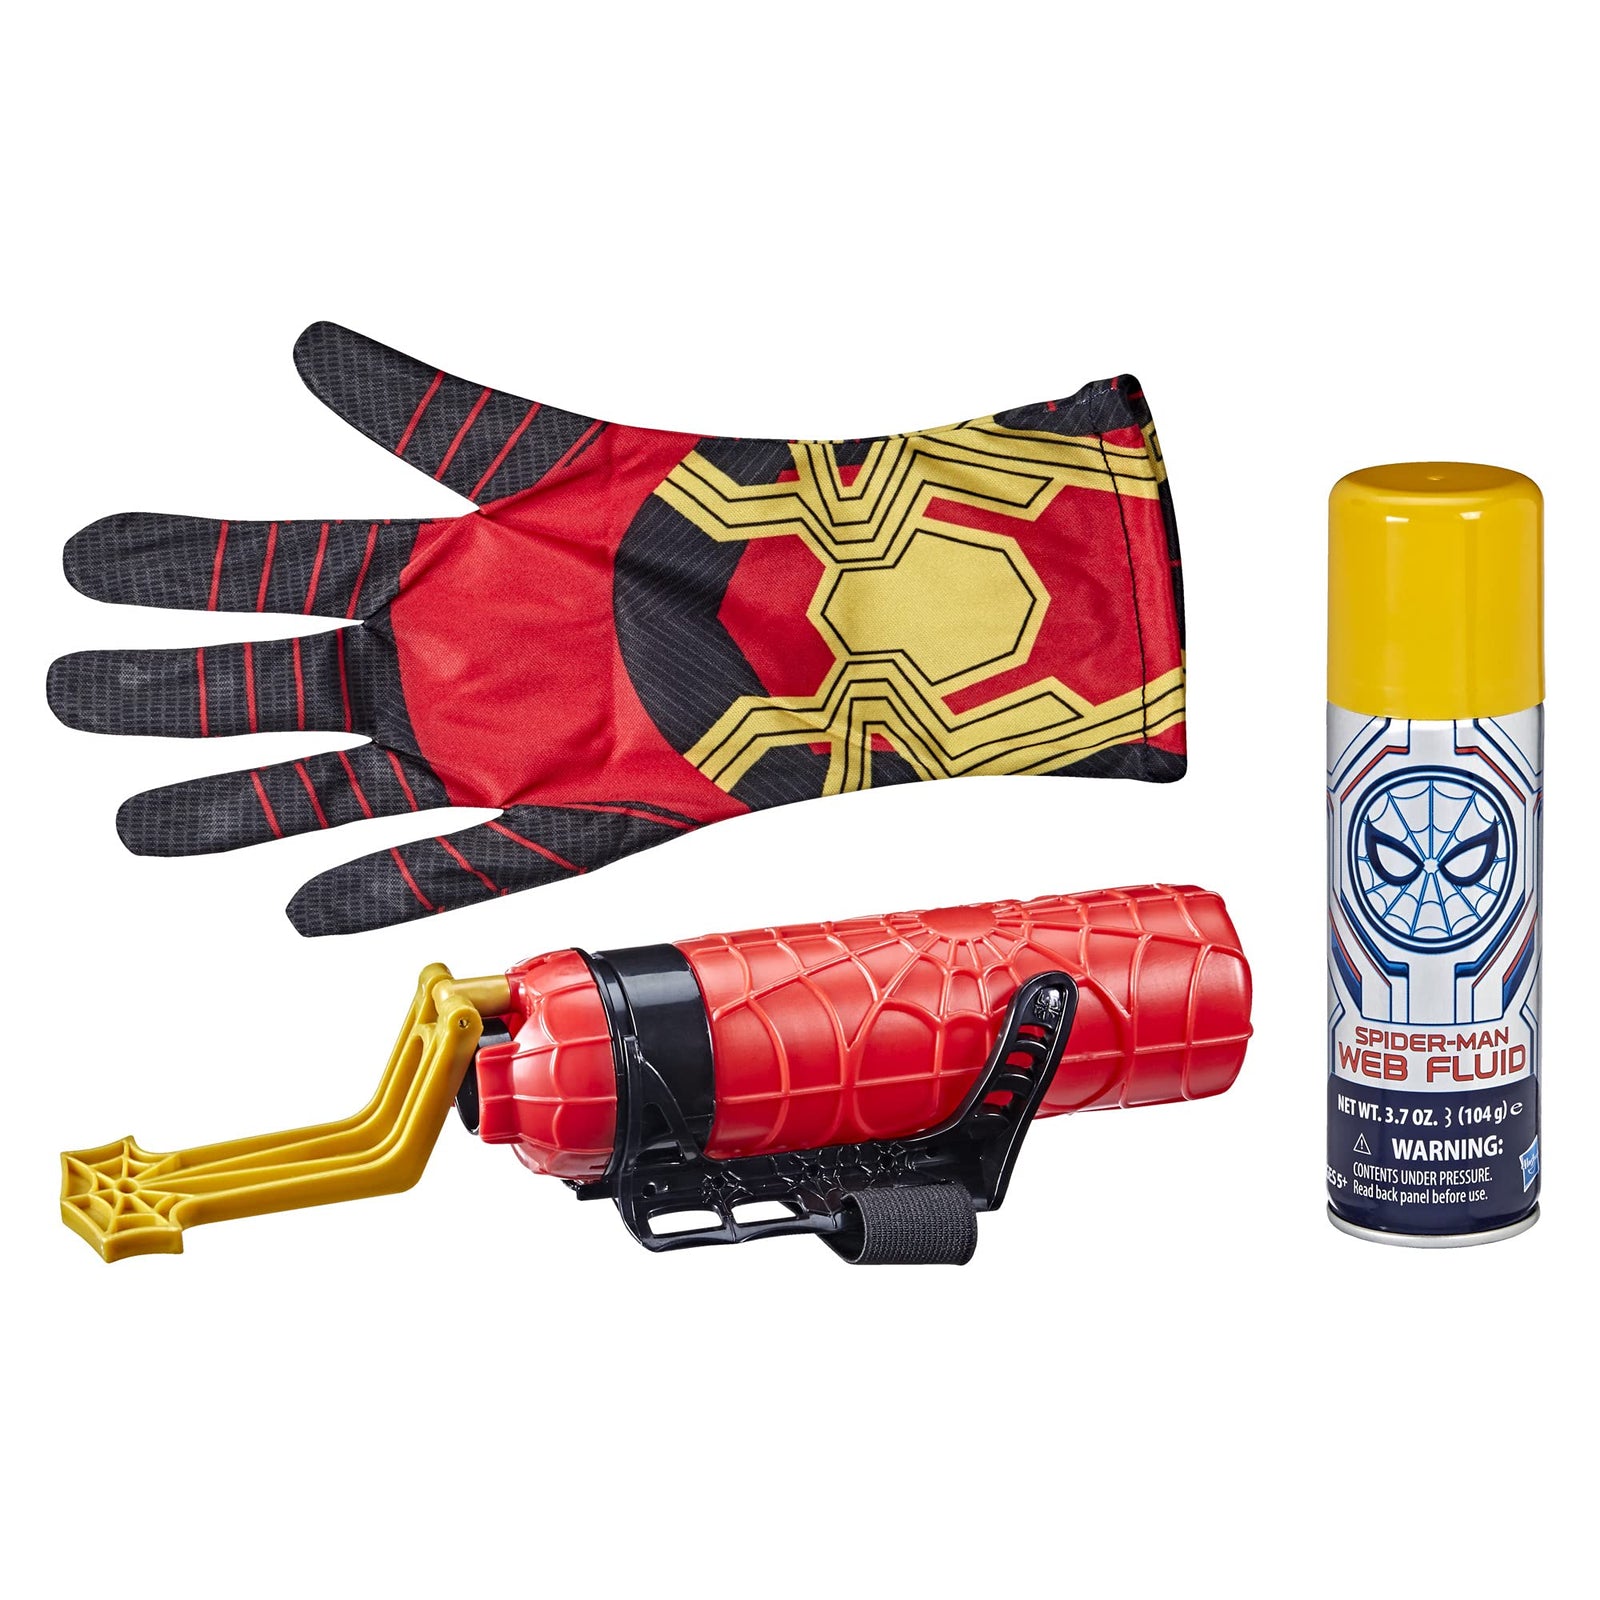 Spider-Man Hasbro Marvel Super Web Slinger Role-Play Toy, Includes Web Fluid, 2-in-1 Shoots Webs or Water, for Kids Ages 5 and Up